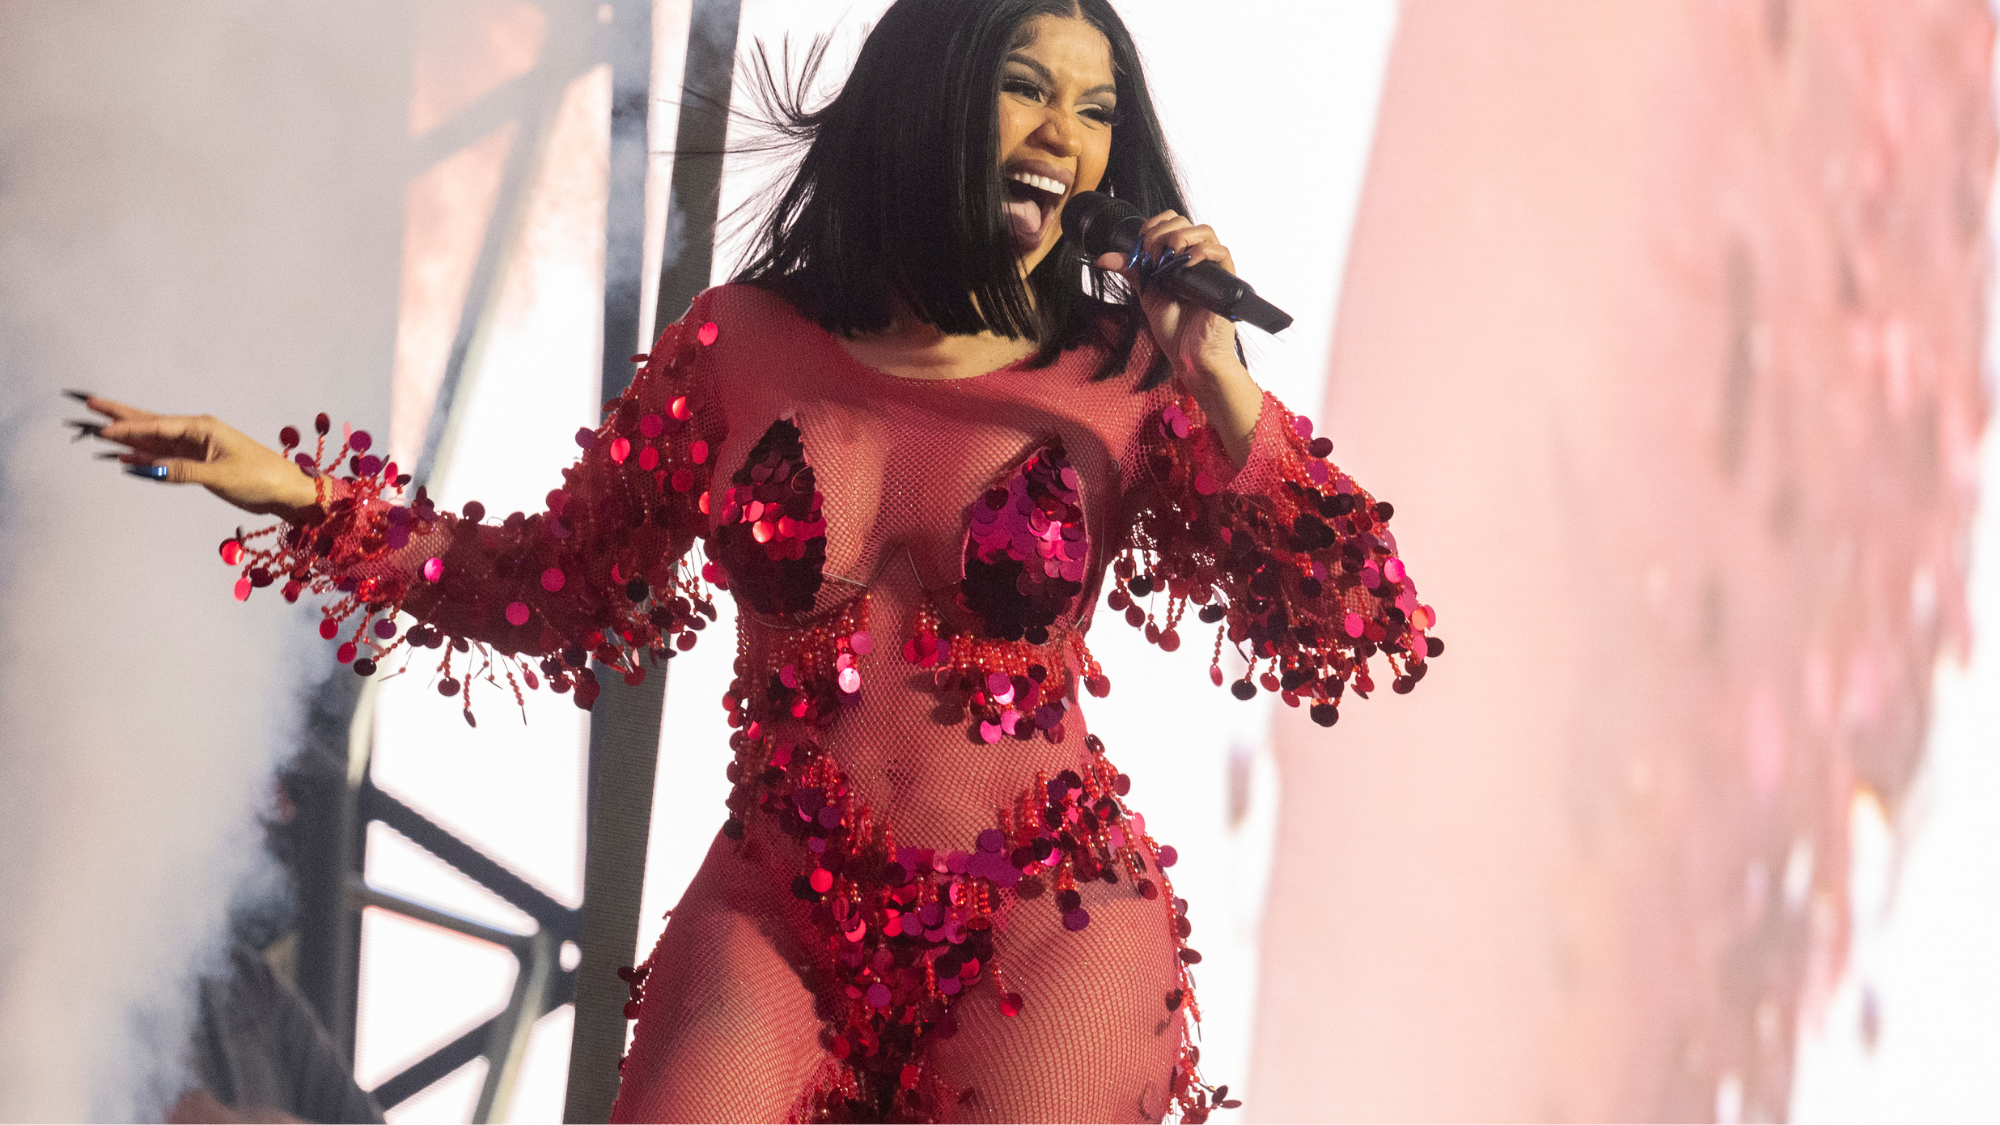 Cardi B Threw Microphone at Concertgoer Who Poured a Drink on Her